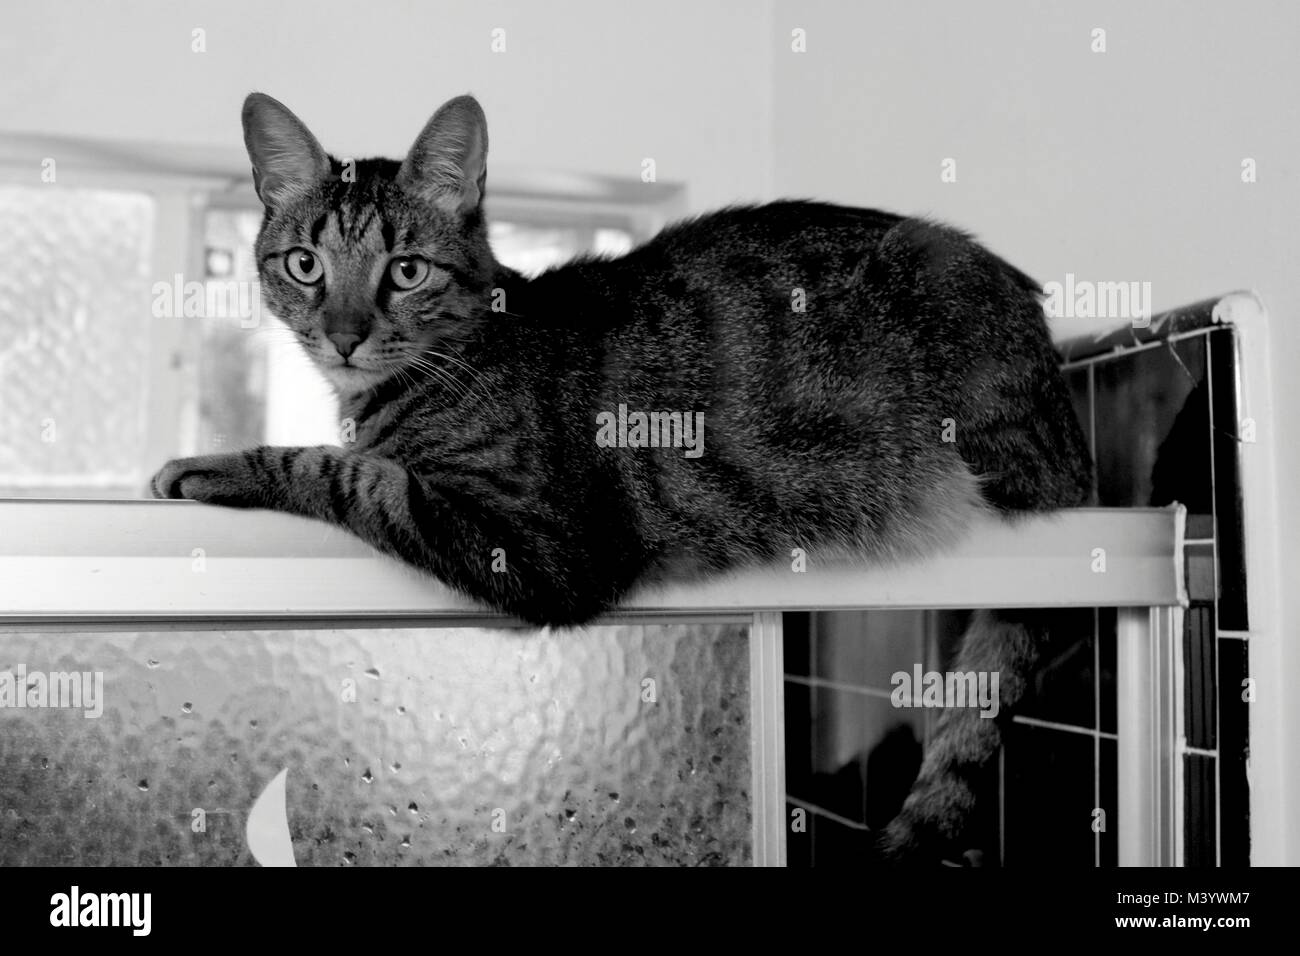 Tabby cat rests on a shower stall. Stock Photo